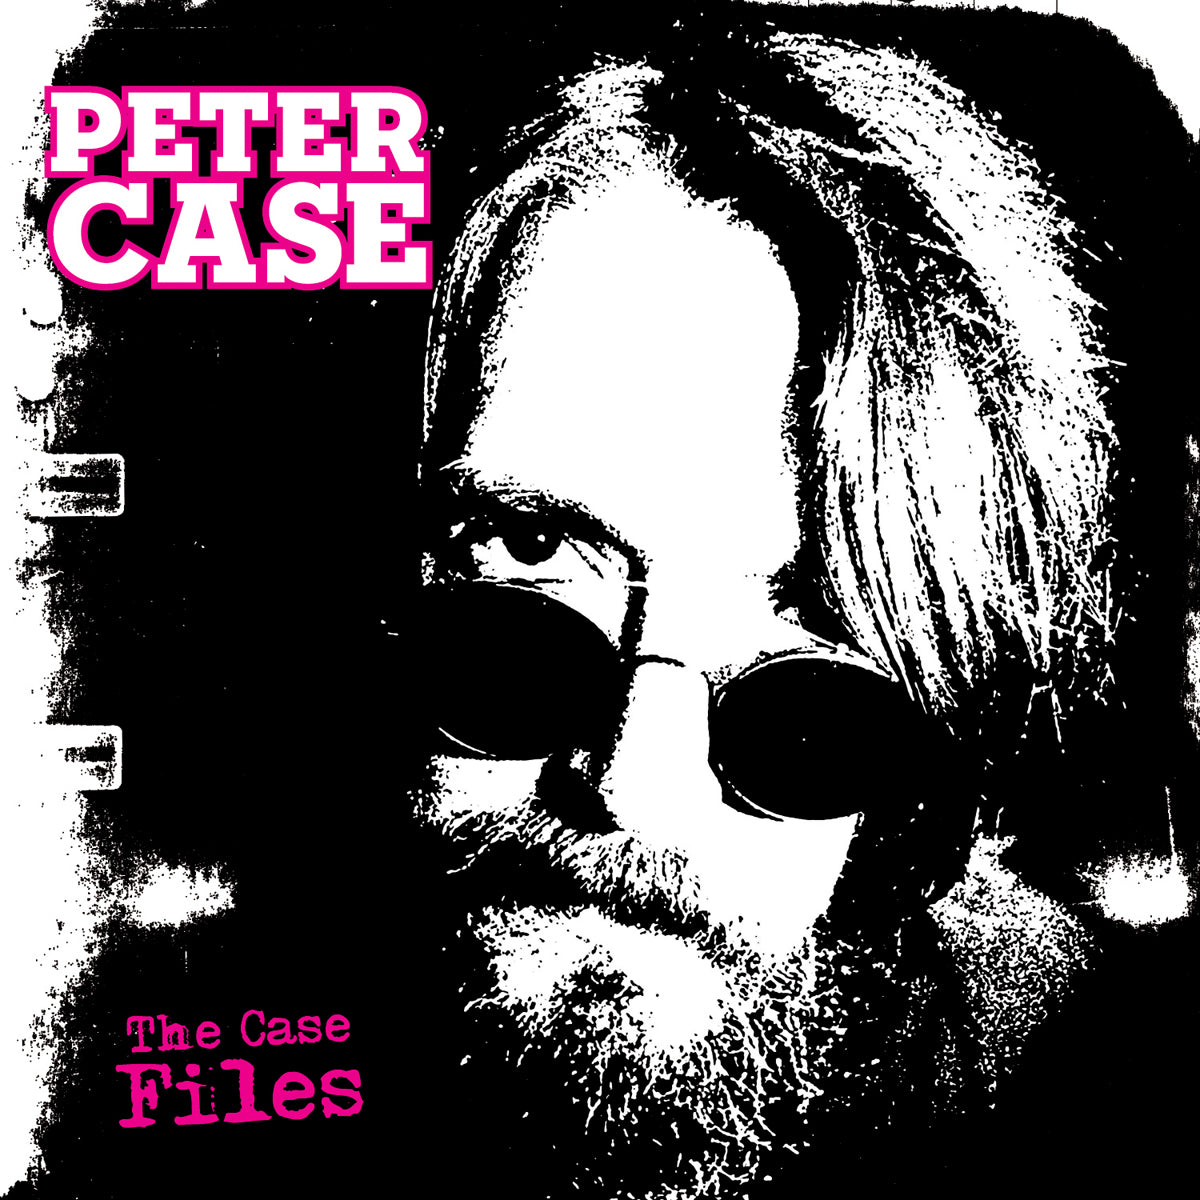 The Case Files [CD]